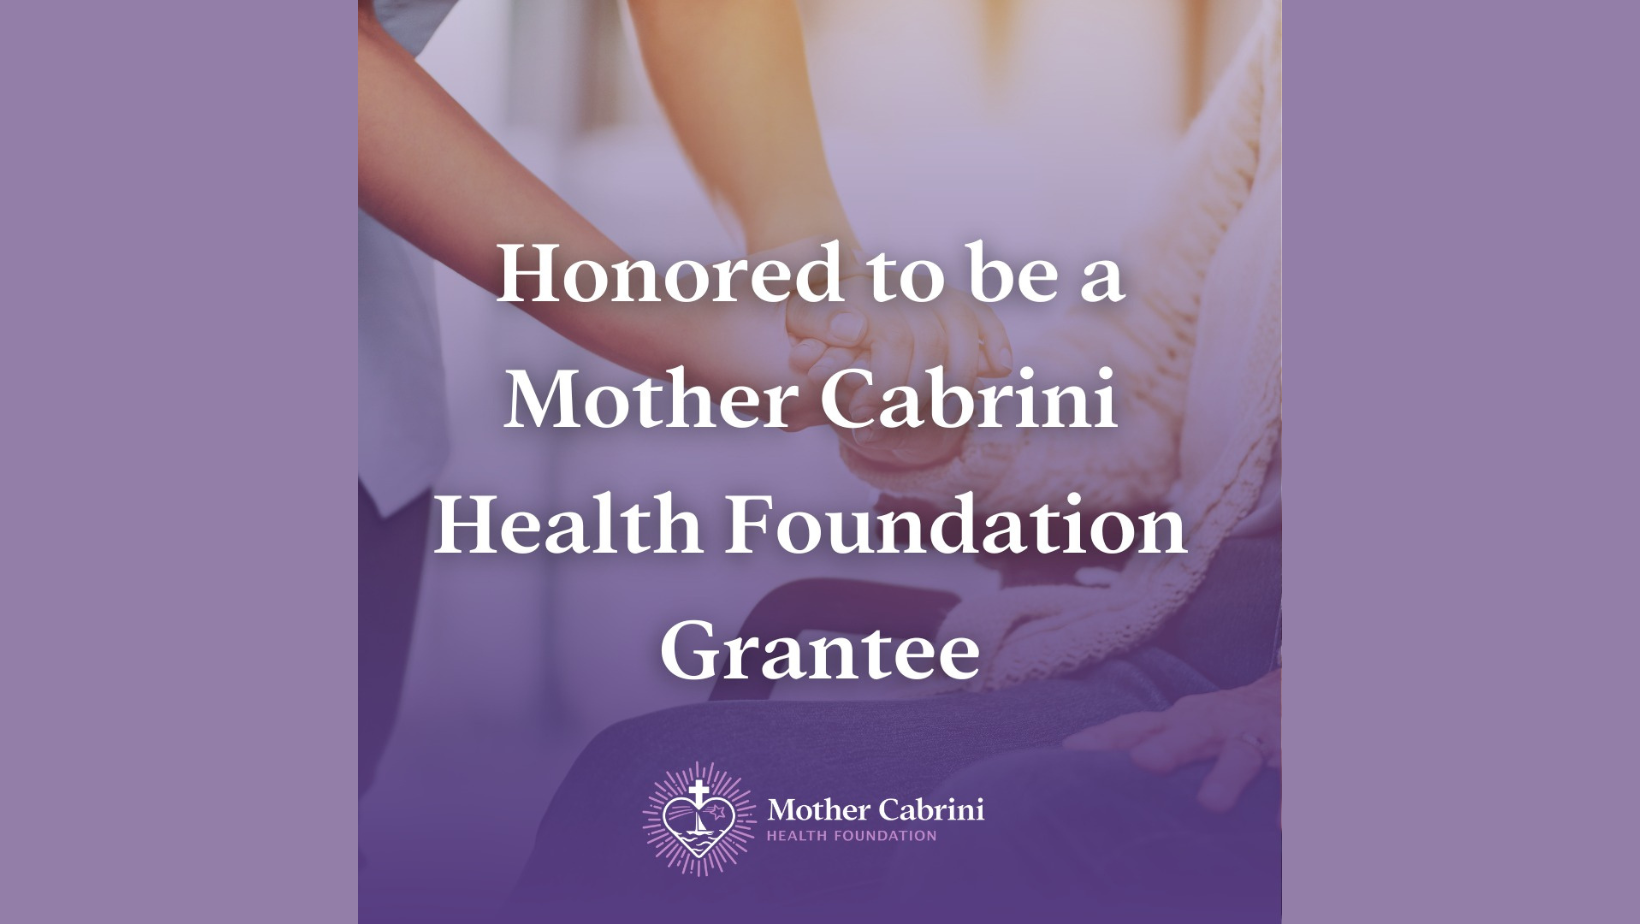 CancerConnects is a Mother Cabrini Health Foundation Grantee